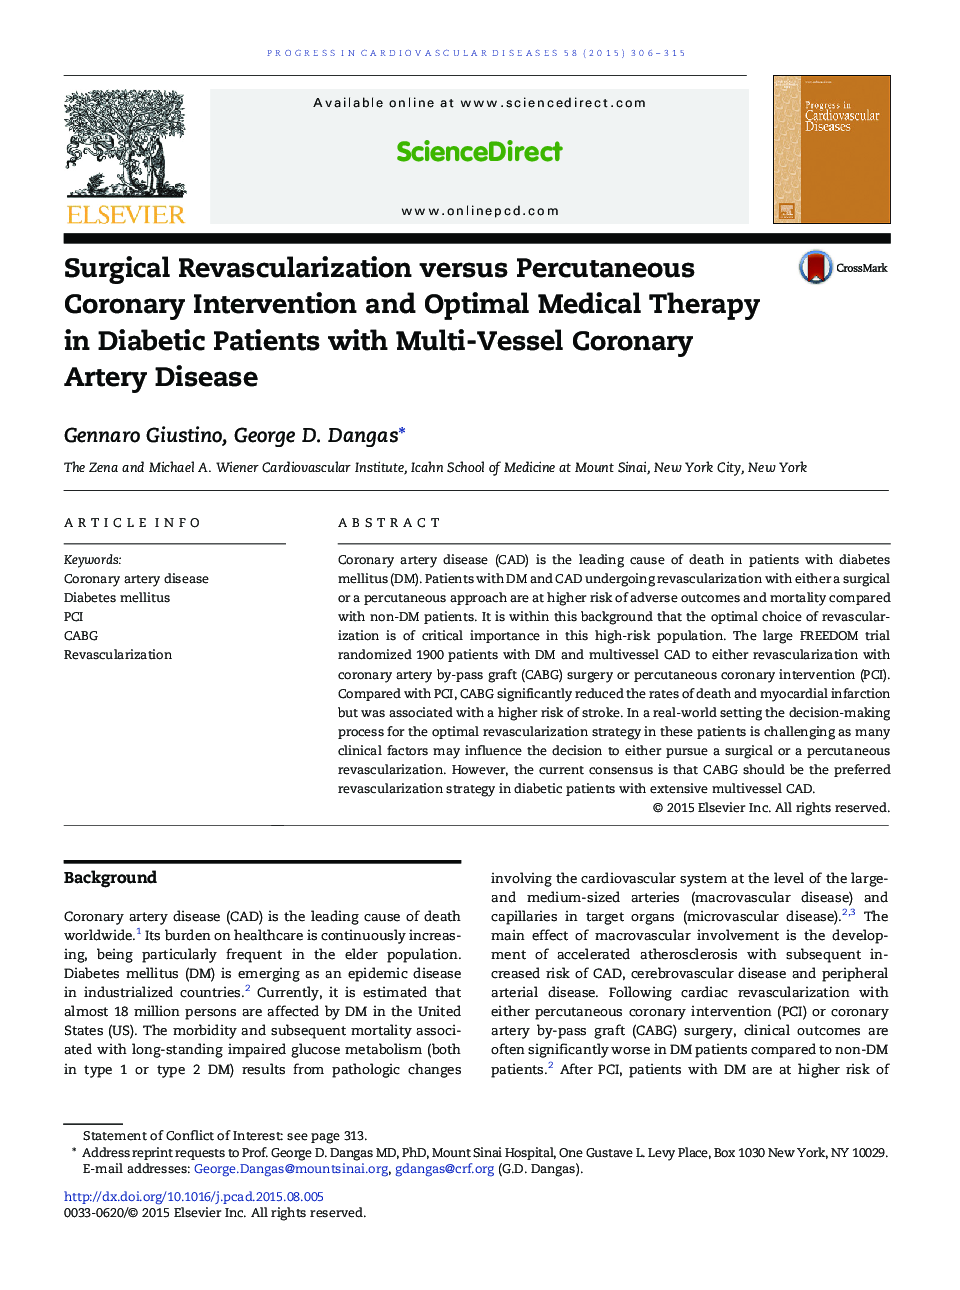 Surgical Revascularization versus Percutaneous Coronary Intervention and Optimal Medical Therapy in Diabetic Patients with Multi-Vessel Coronary Artery Disease 